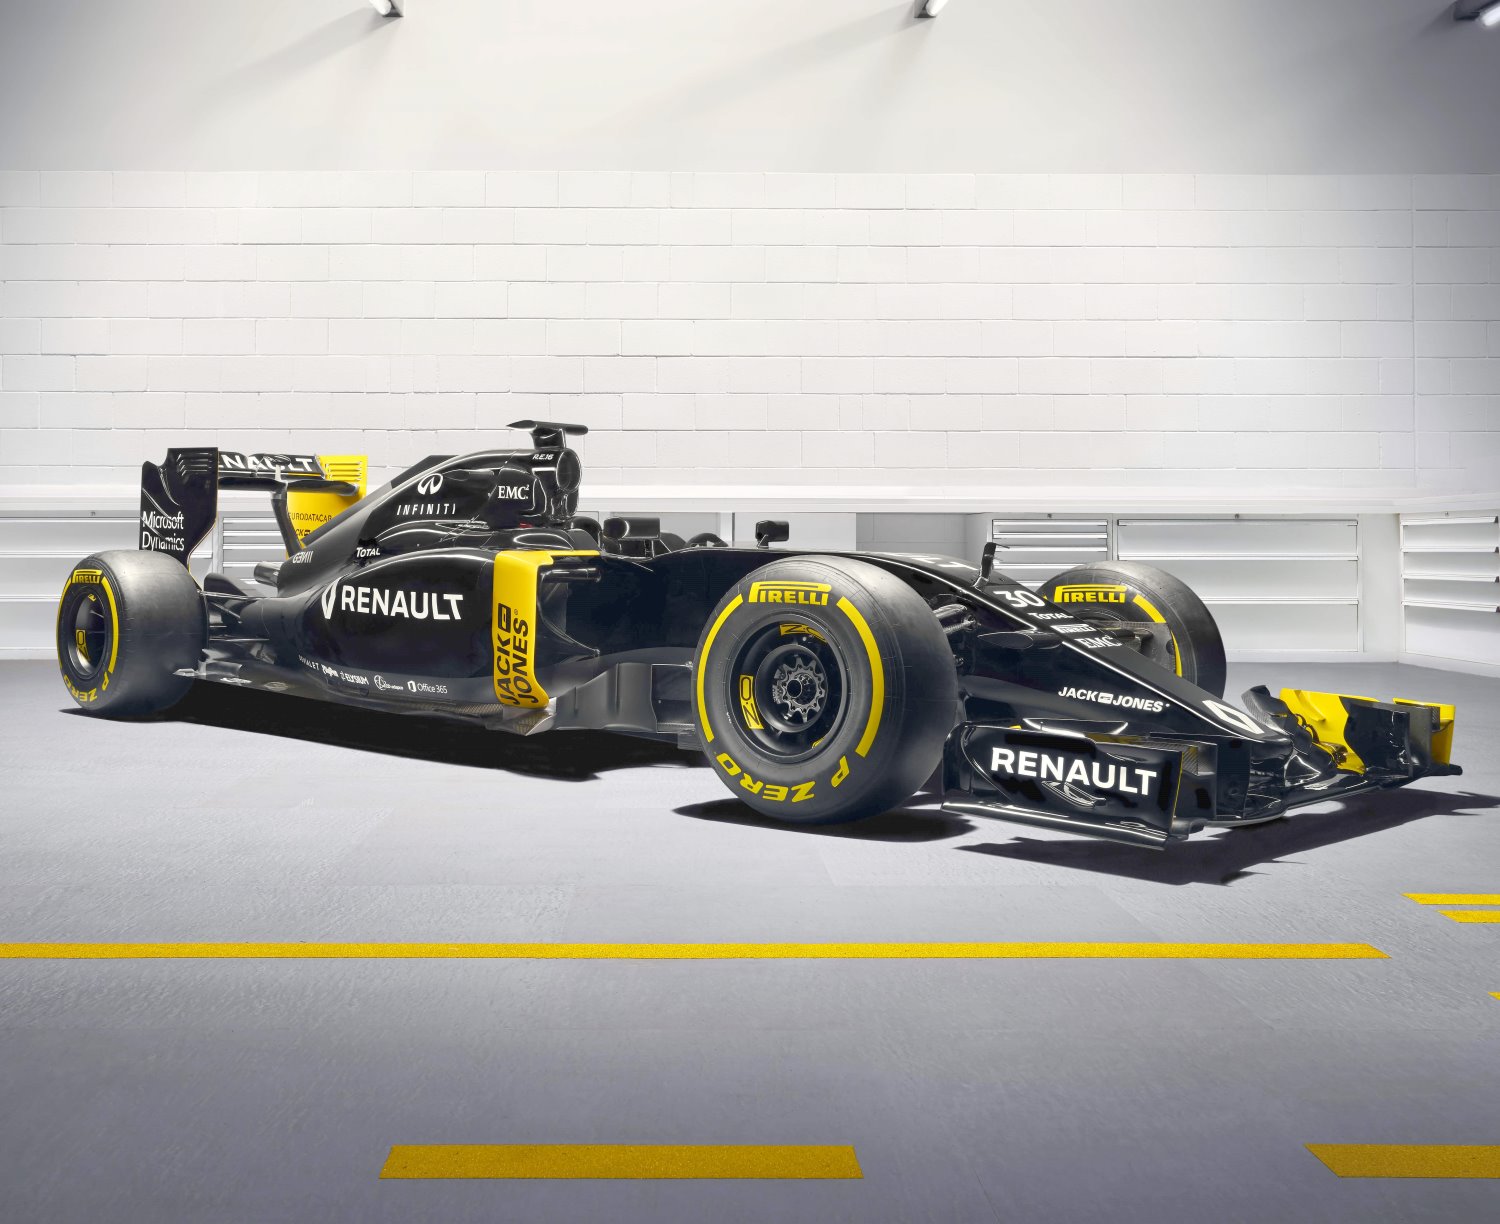 A slightly upgraded version of their 2015 car